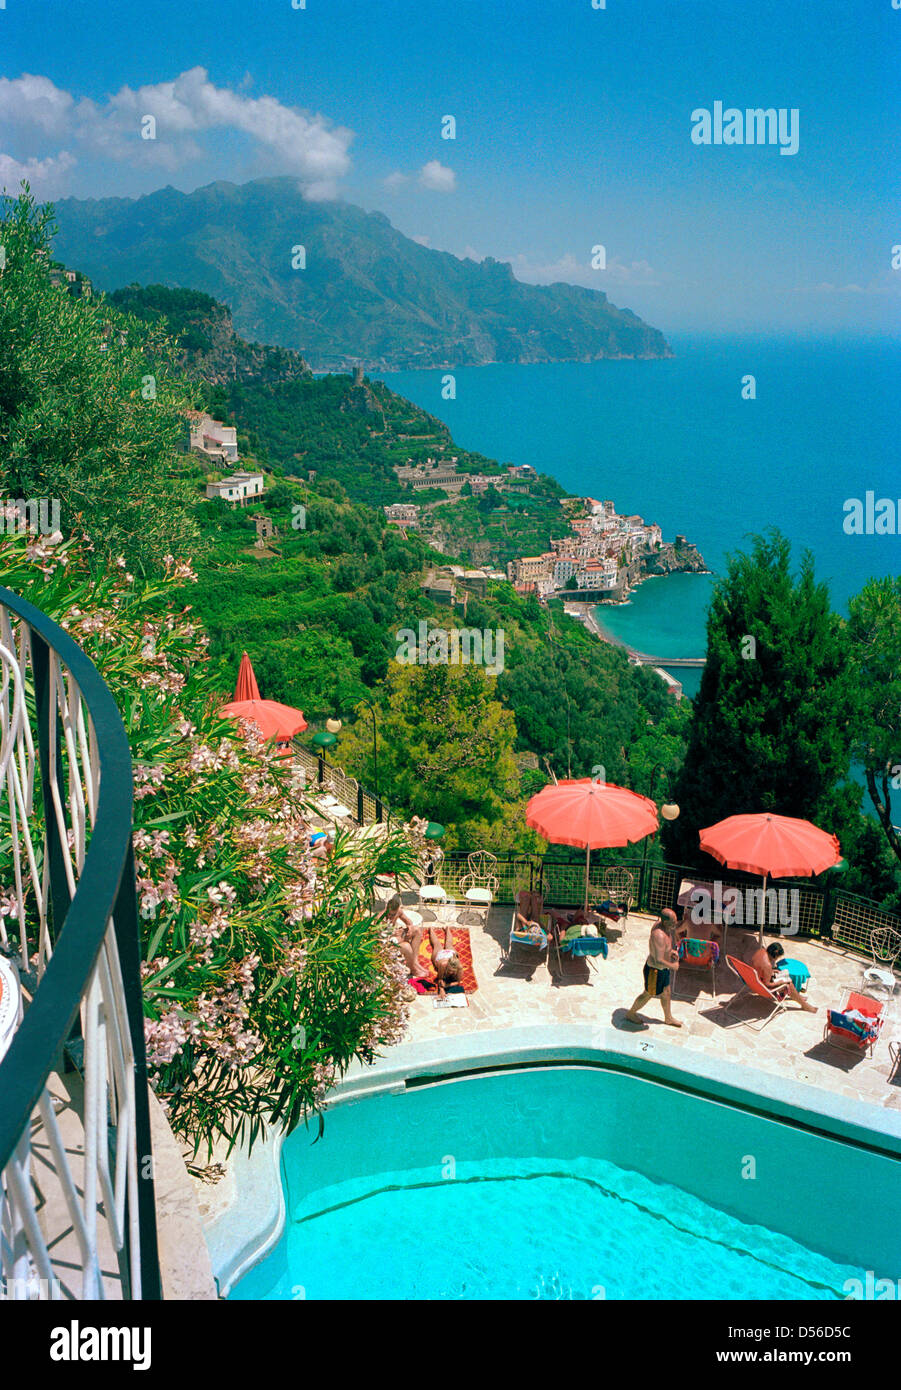 The view along the coastline towards Amalfi town from a clifftop hotel Stock Photo